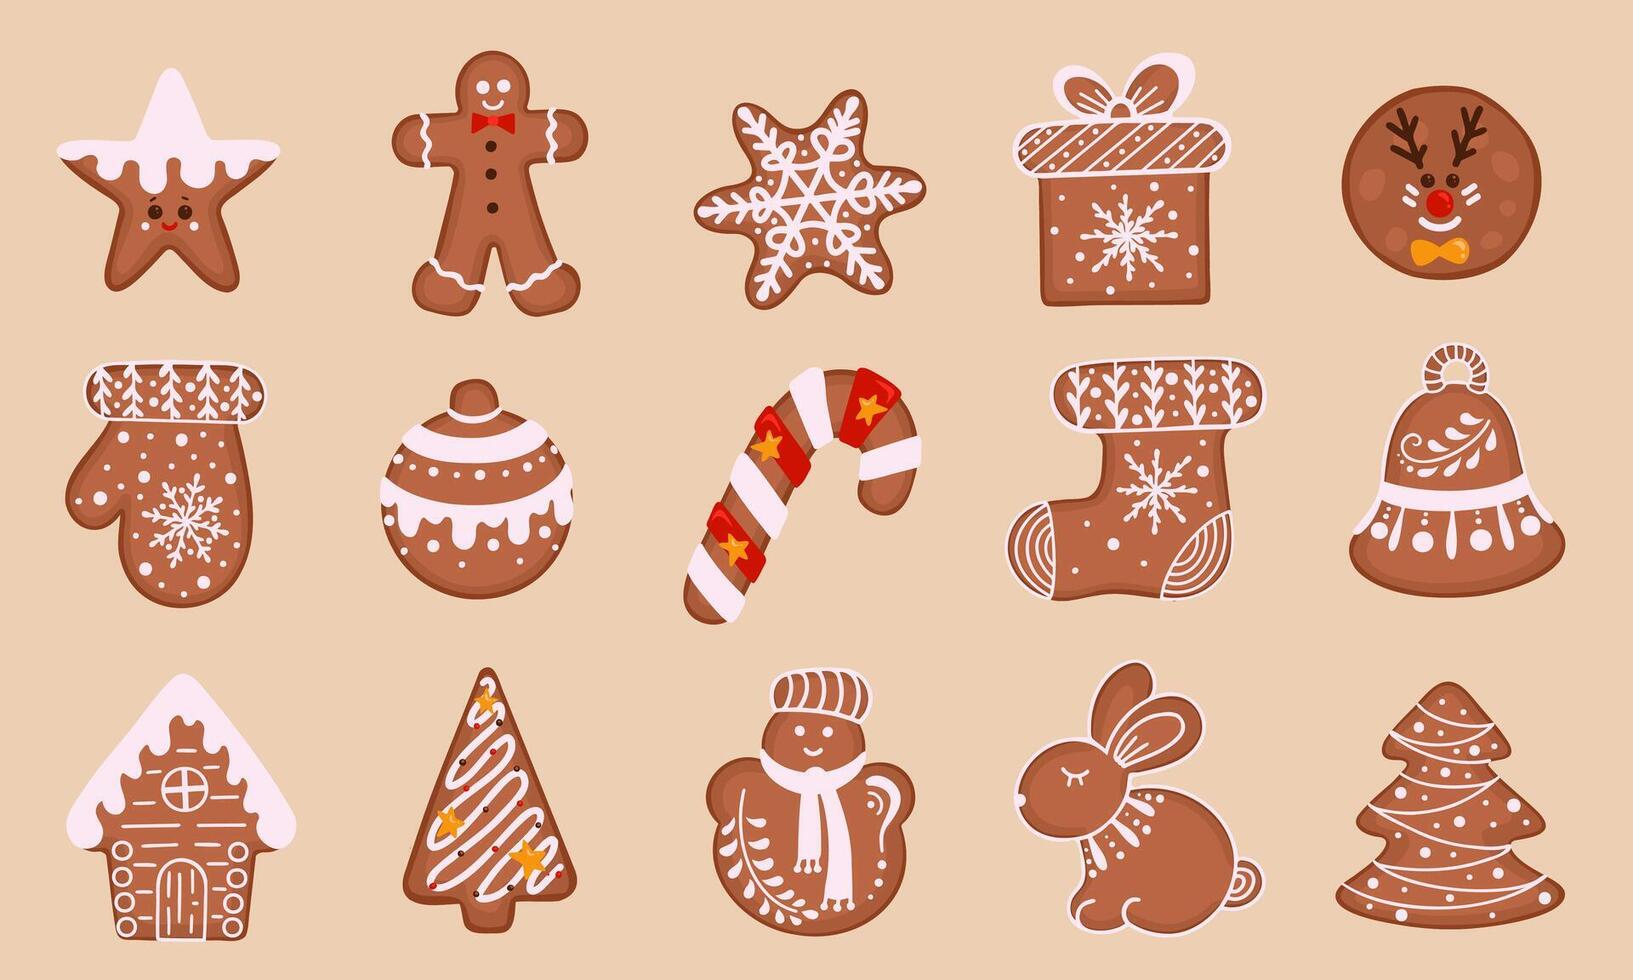 Christmas Gingerbread Cookie. Set of winter homemade biscuits in the form of different characters and holiday items. Illustration for backgrounds and packaging. Isolated on white background. vector